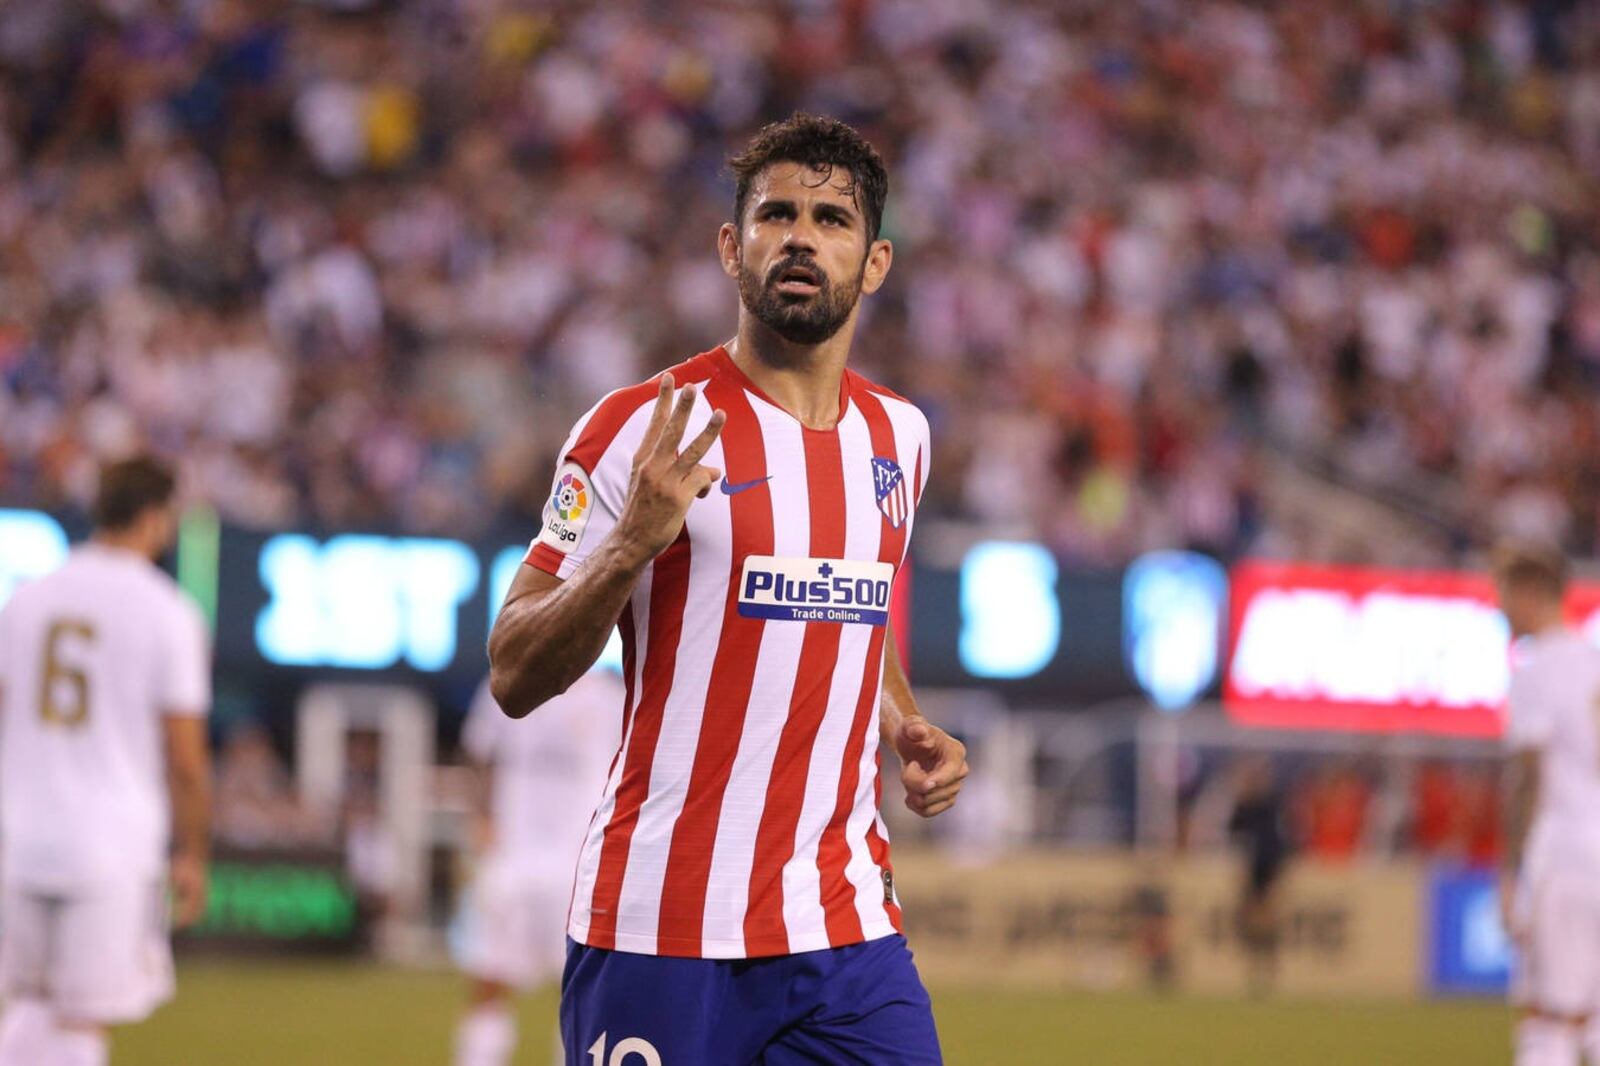 Back to the UK? Diego Costa’s lifesaving could be in the Premier League